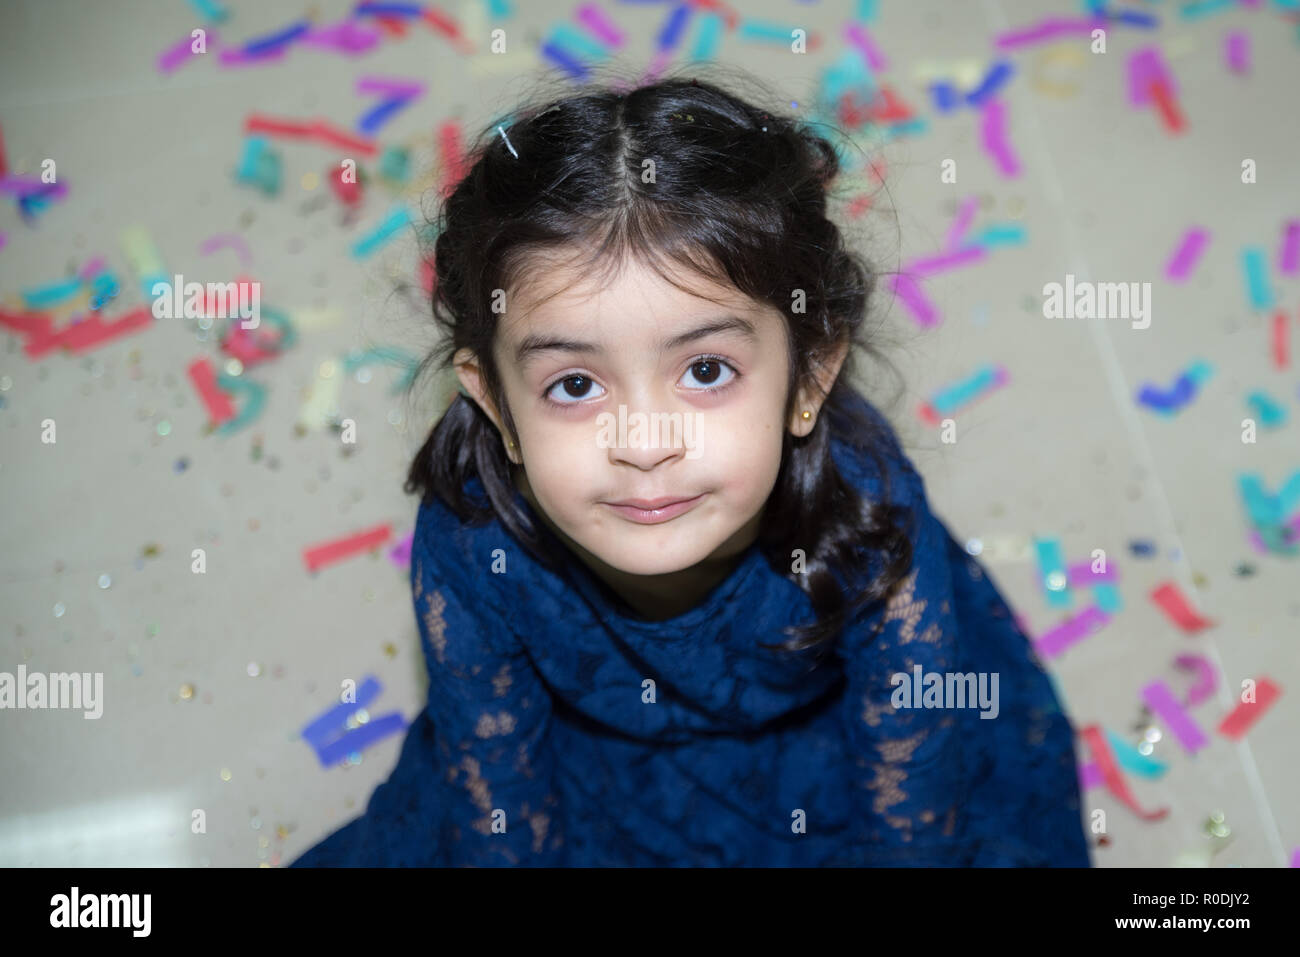 A little asian girl looking up and staring at camera on birthday celebration Stock Photo